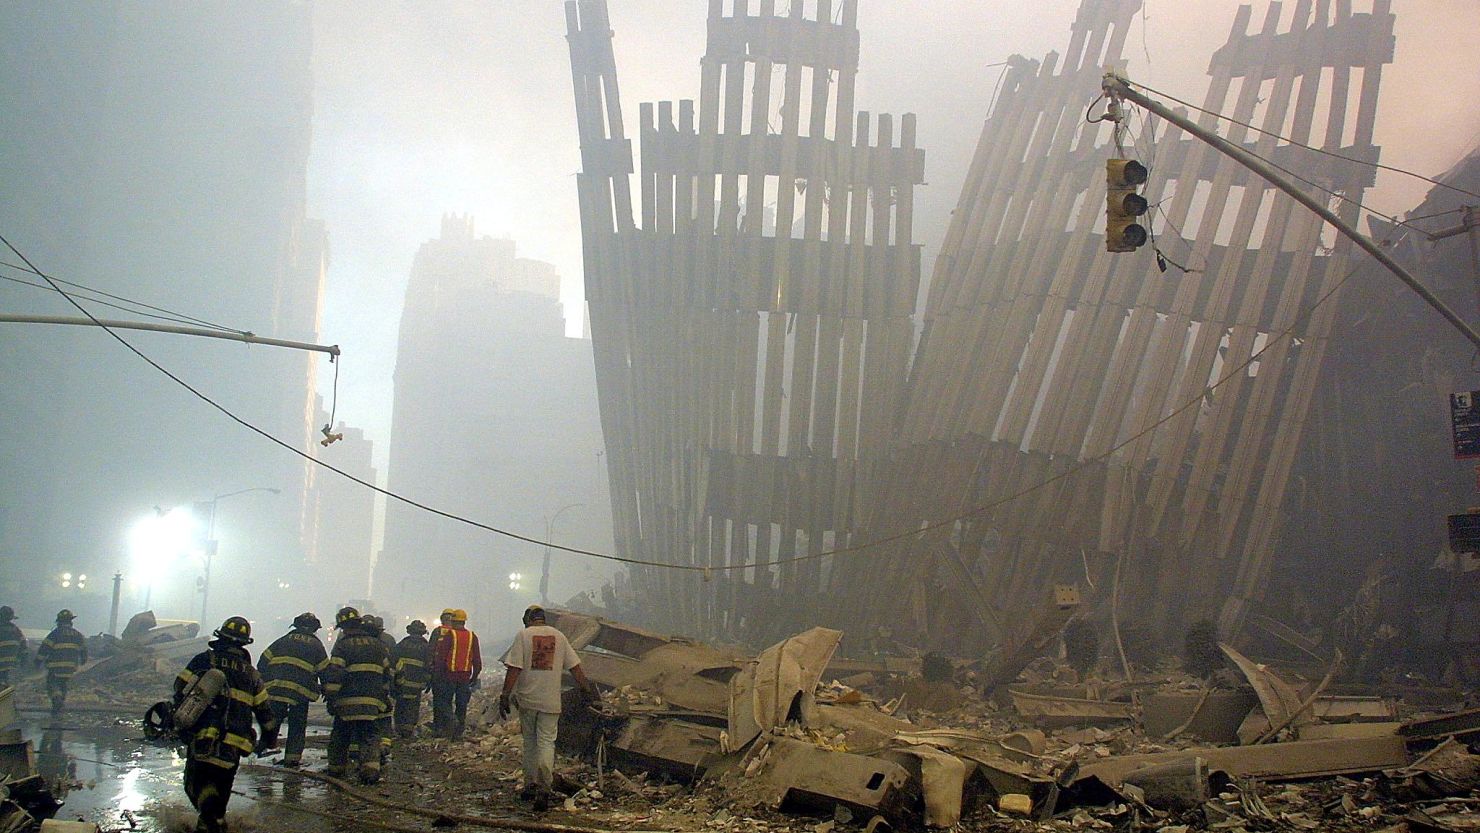 Firefighters make their way through the rubble of the World Trade Center on September 11, 2001. (file photo)